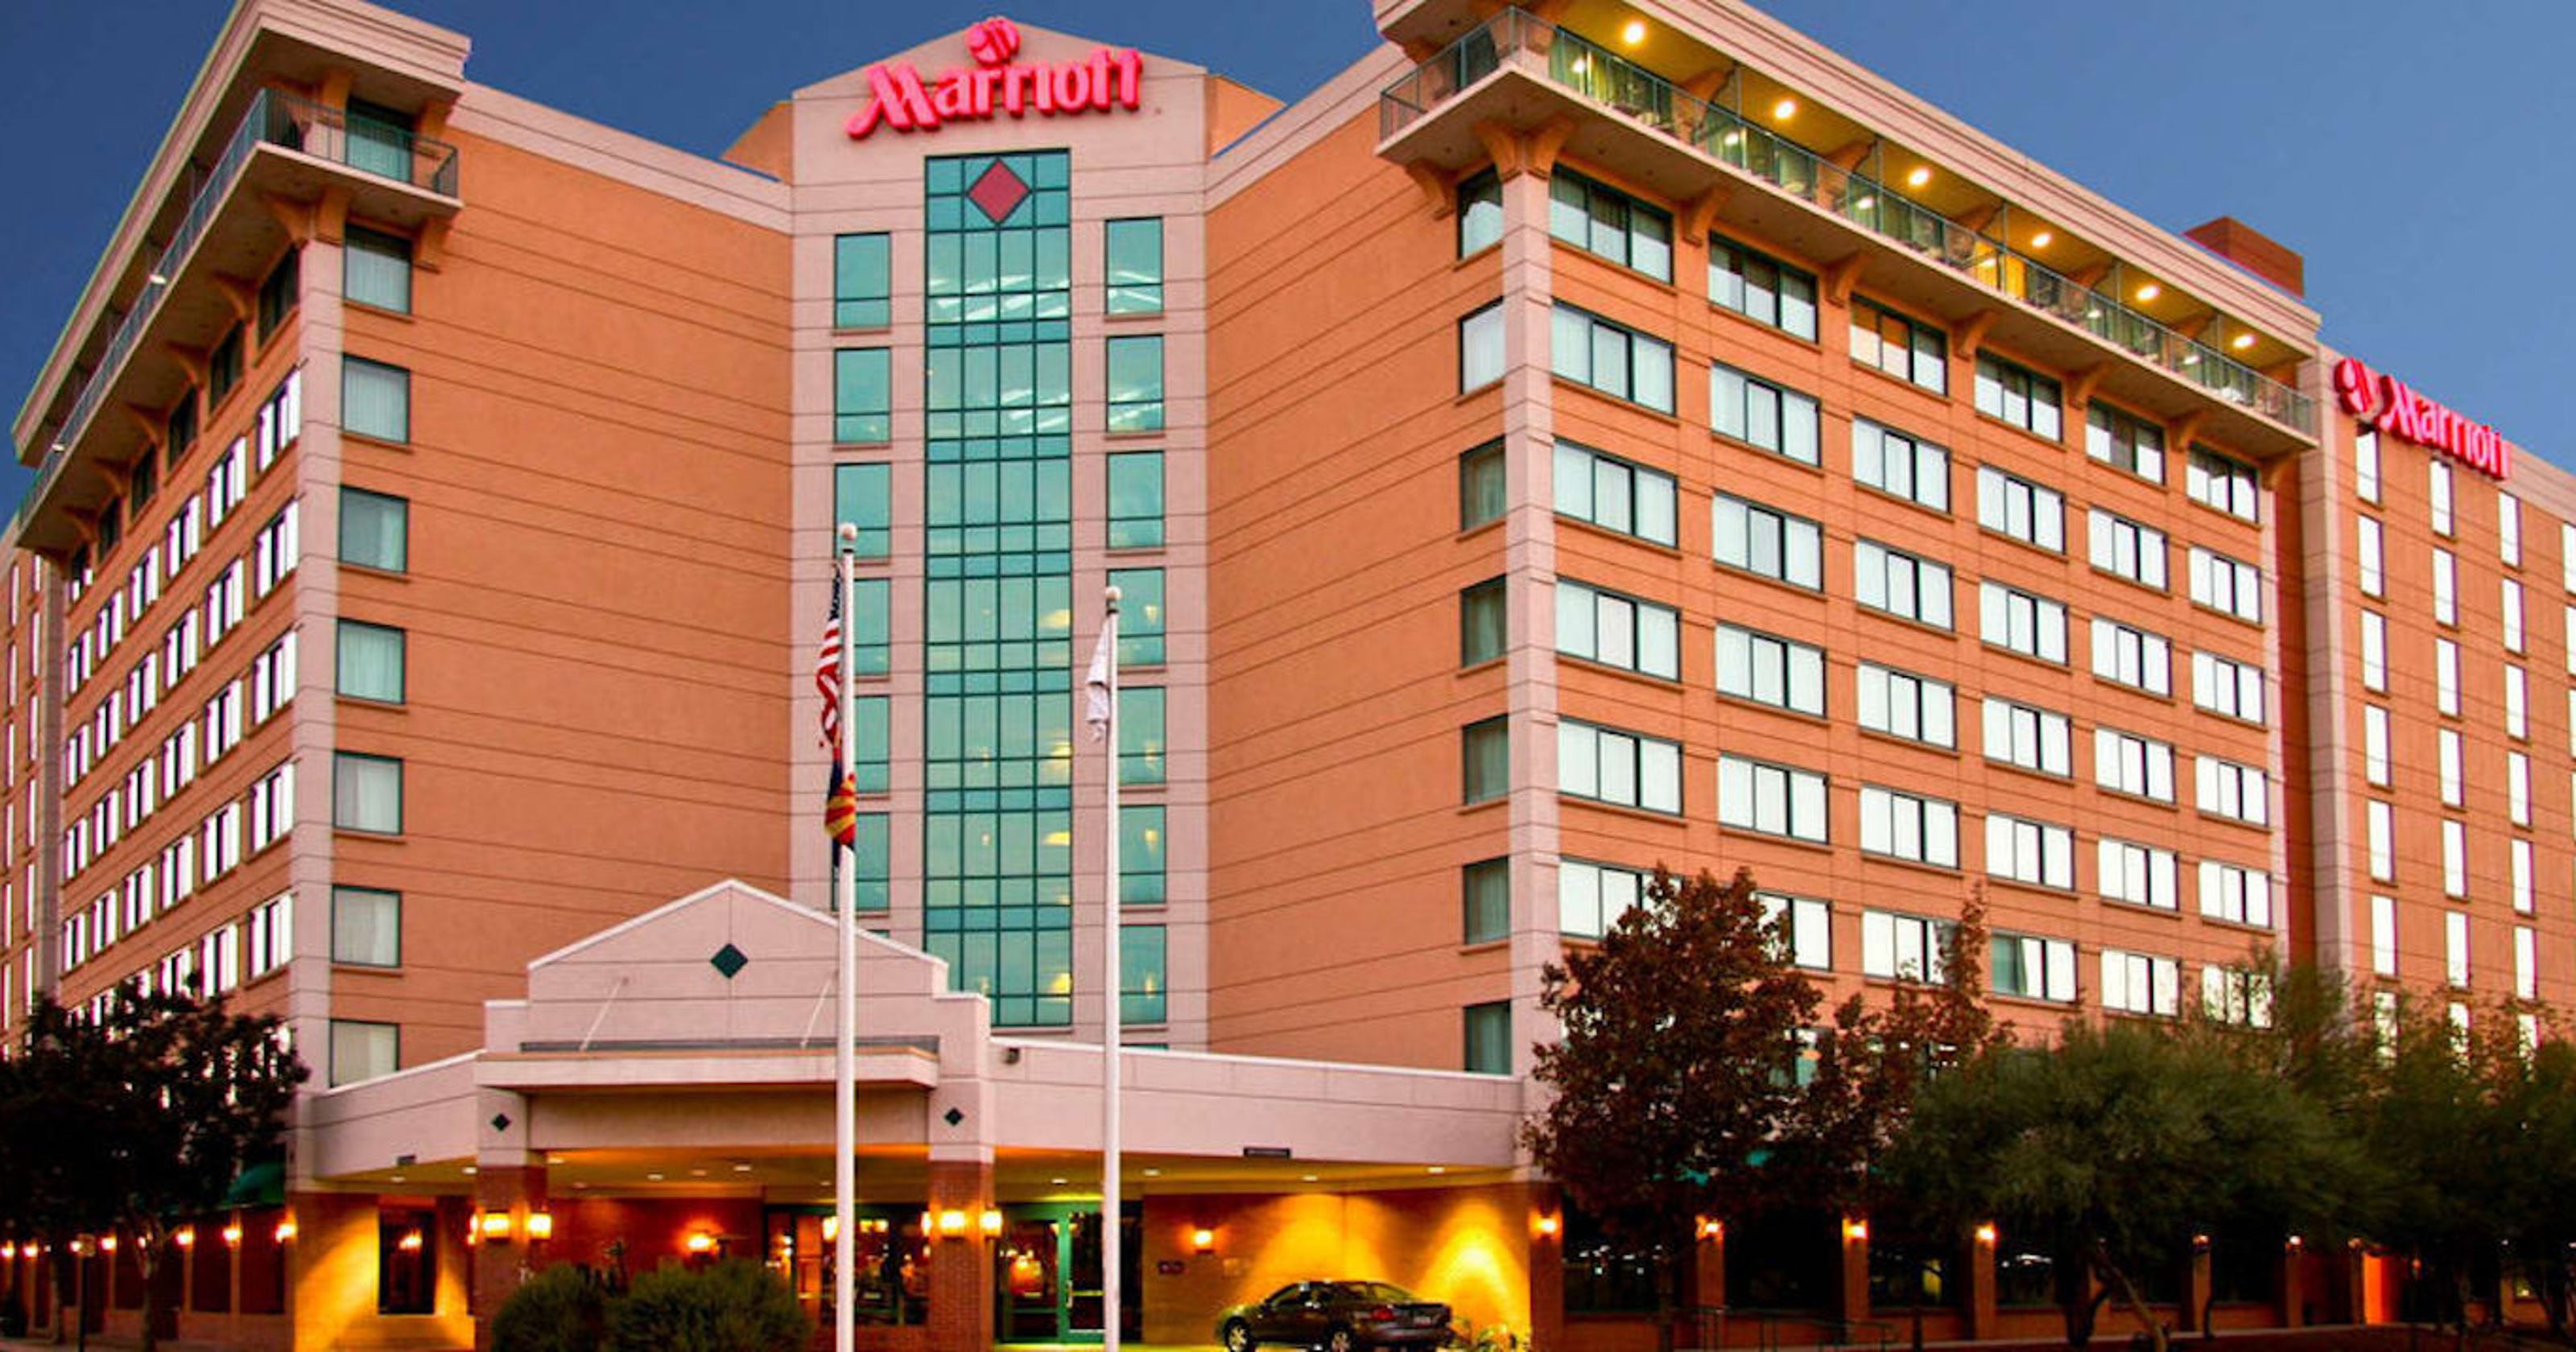 Marriott Data Breach Lawsuit Filed 2015 Breach Prompts Questions